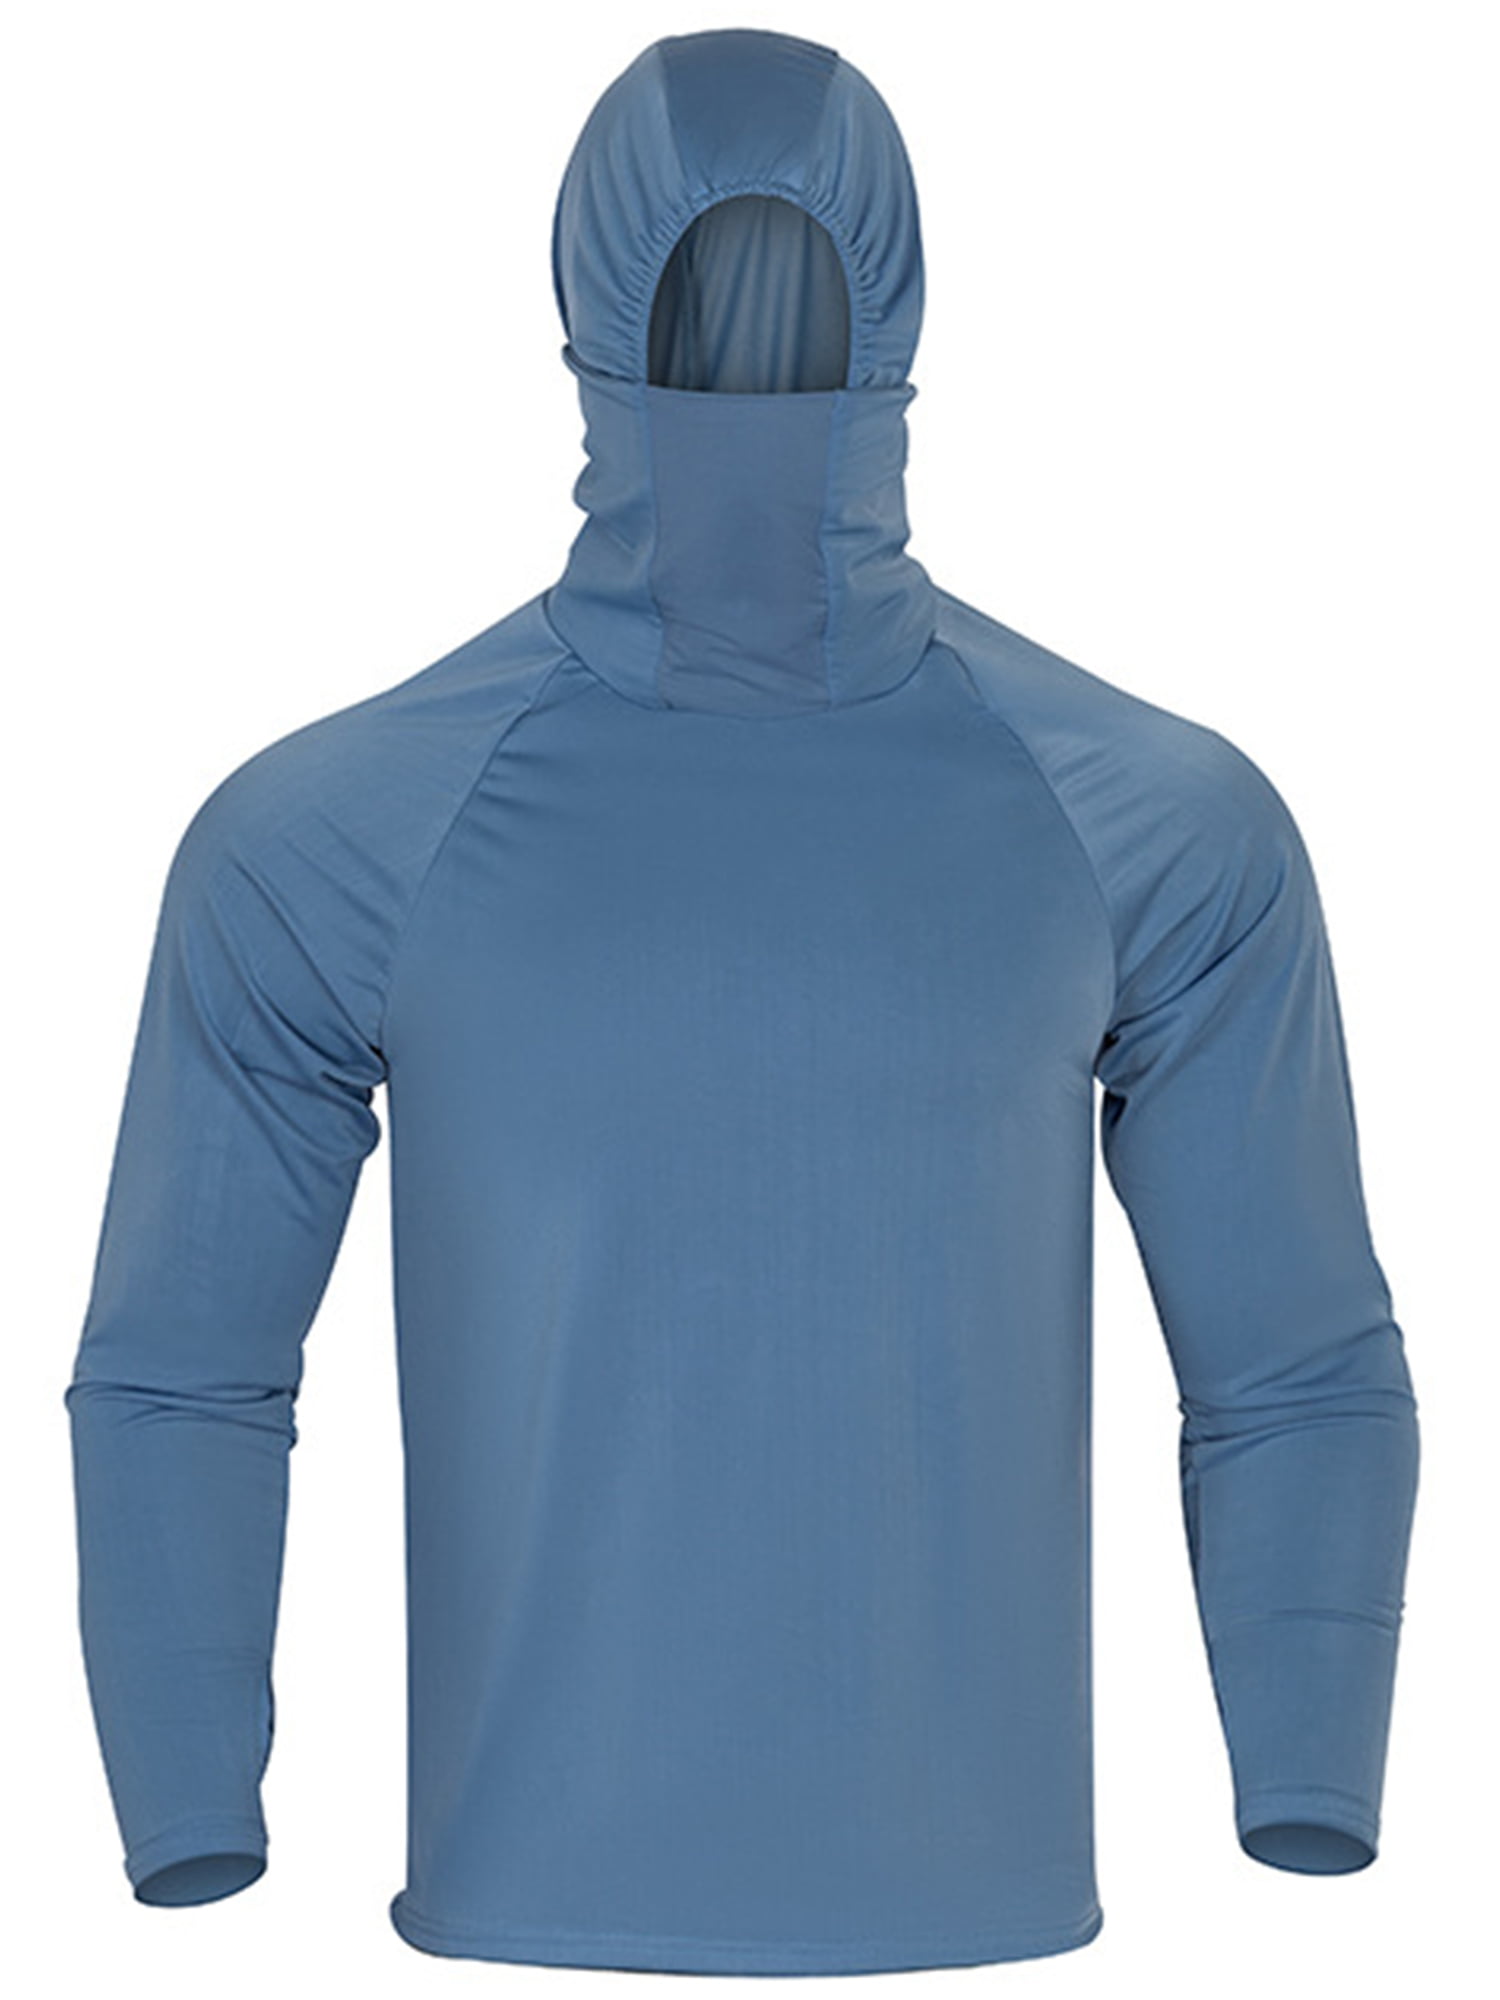 Niuer Breathable Fishing Shirts for Men UPF 50 with Gaiter Mask Sun  Protection T-Shirt Summer Quick Dry Long Sleeve Fishing Hoodies Tops 